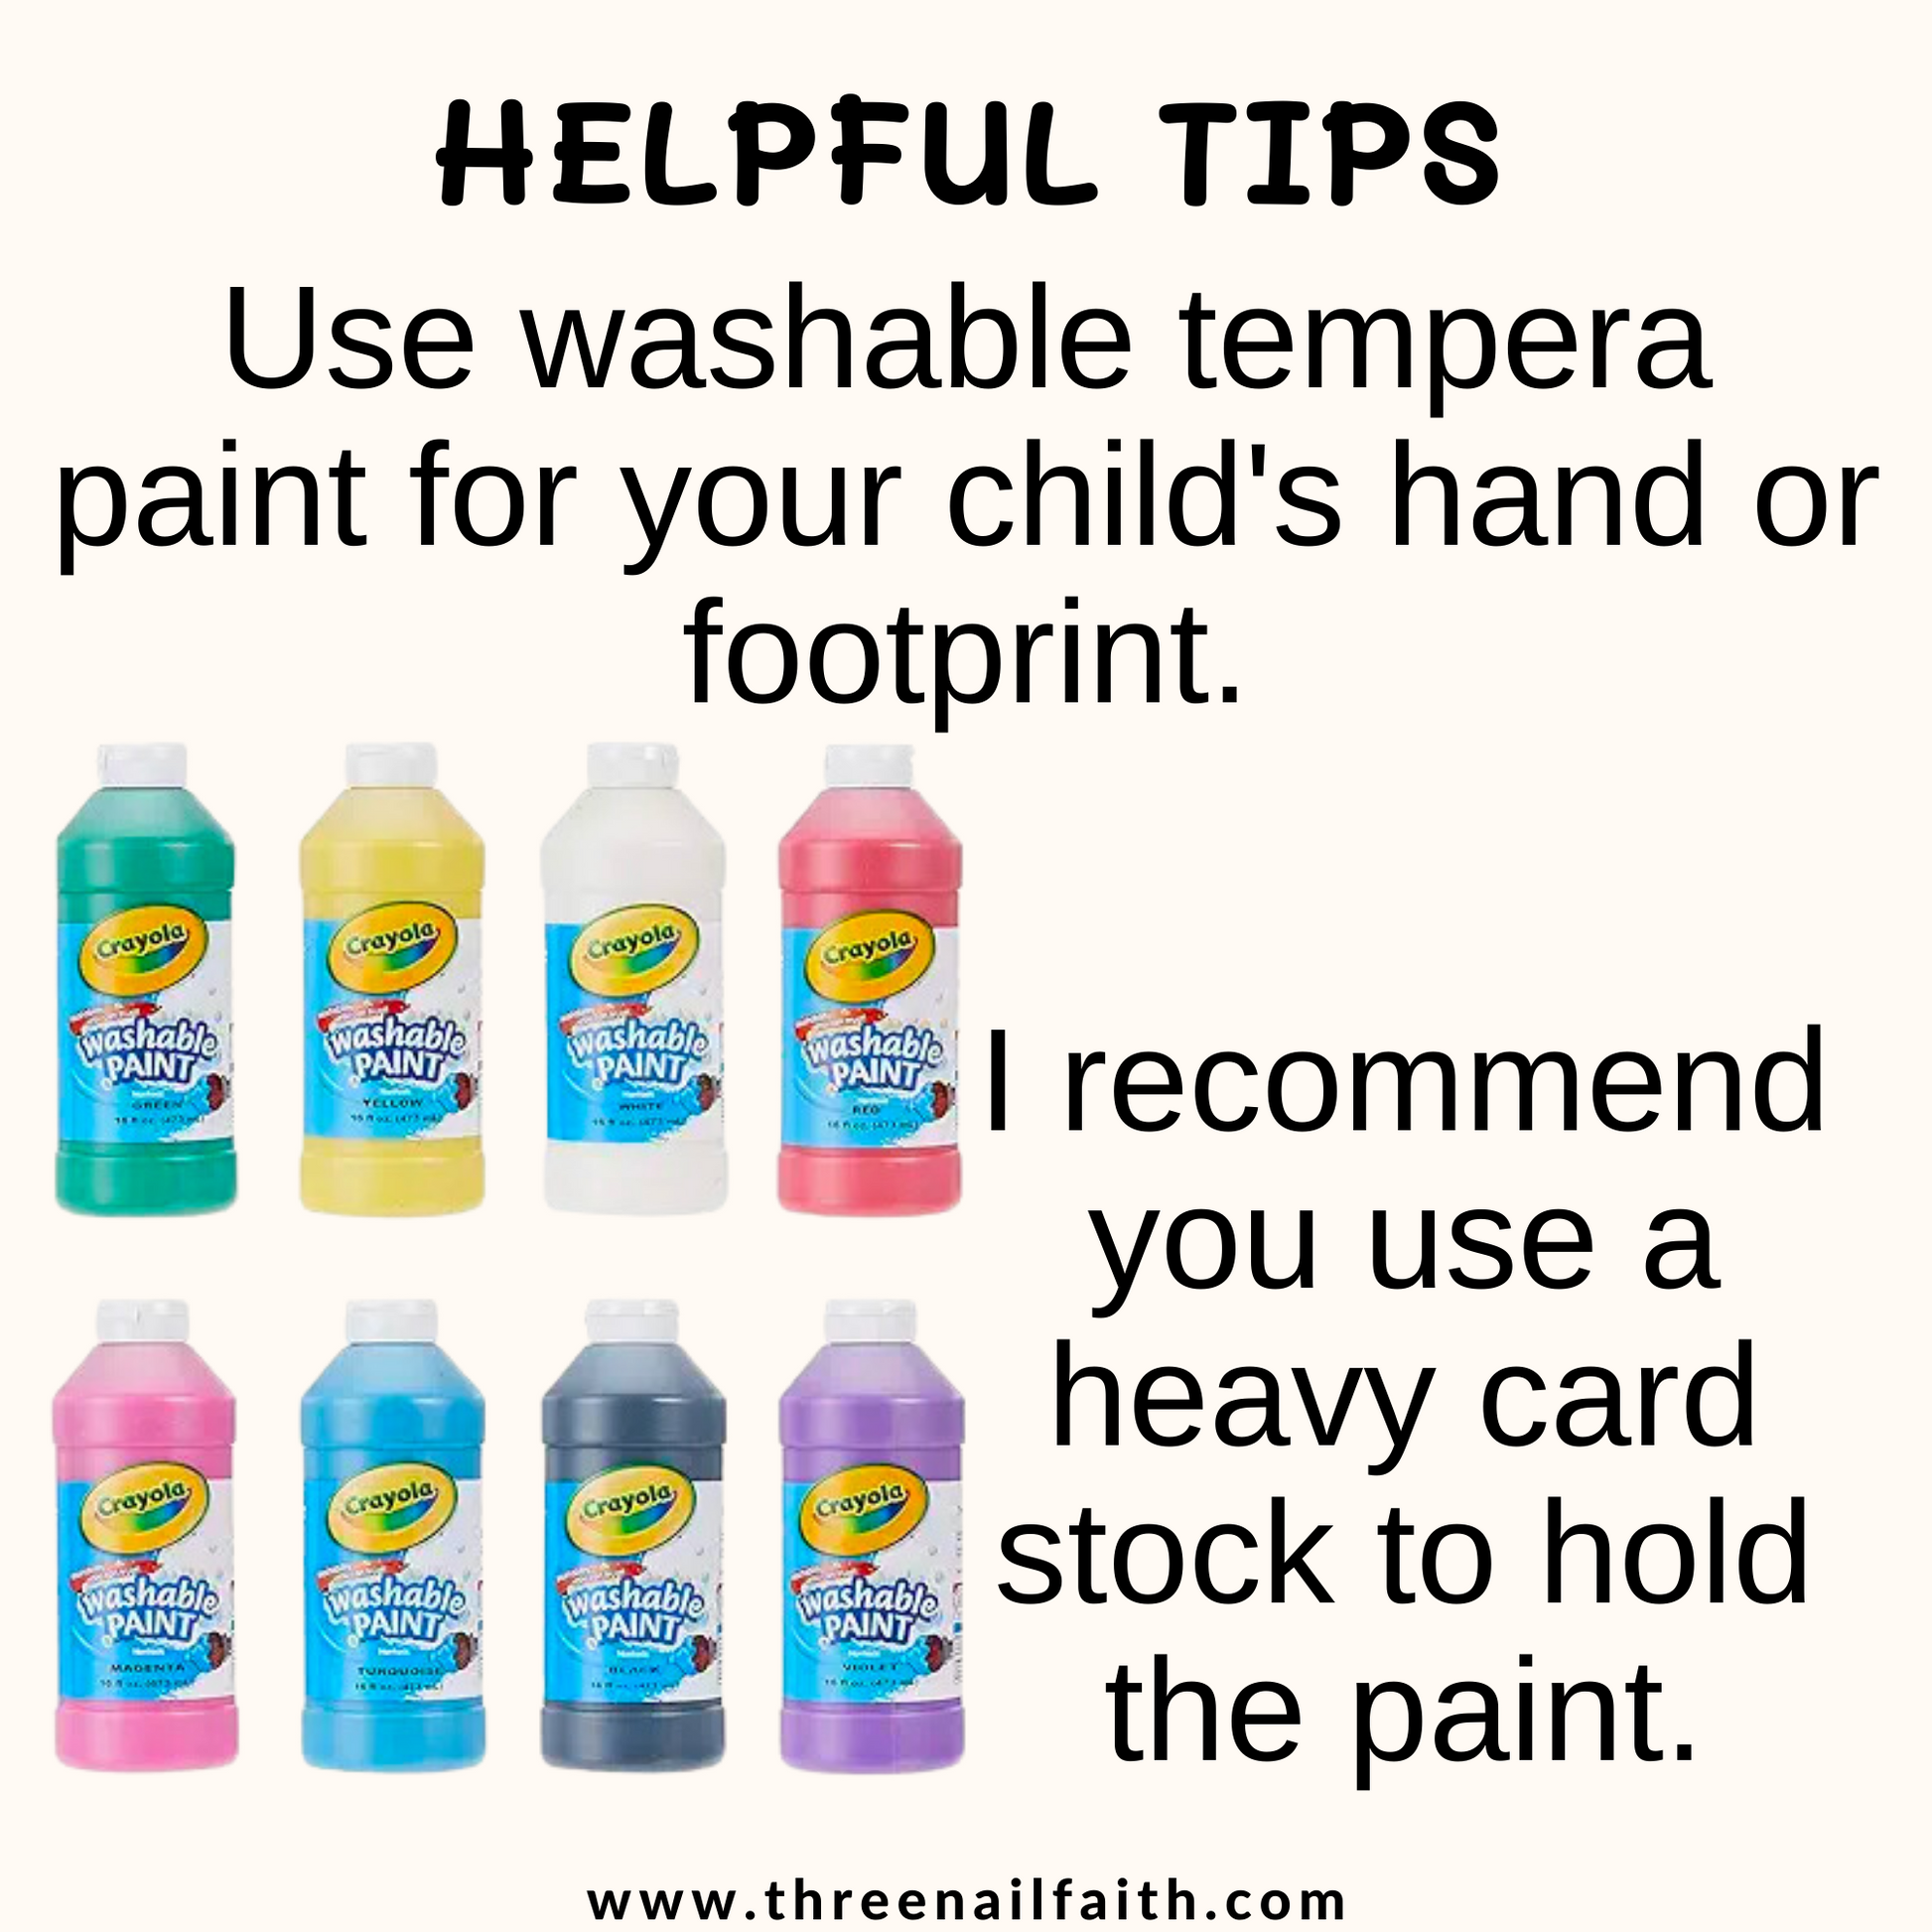 Recommend paint is washable tempera paint. and print on card stock